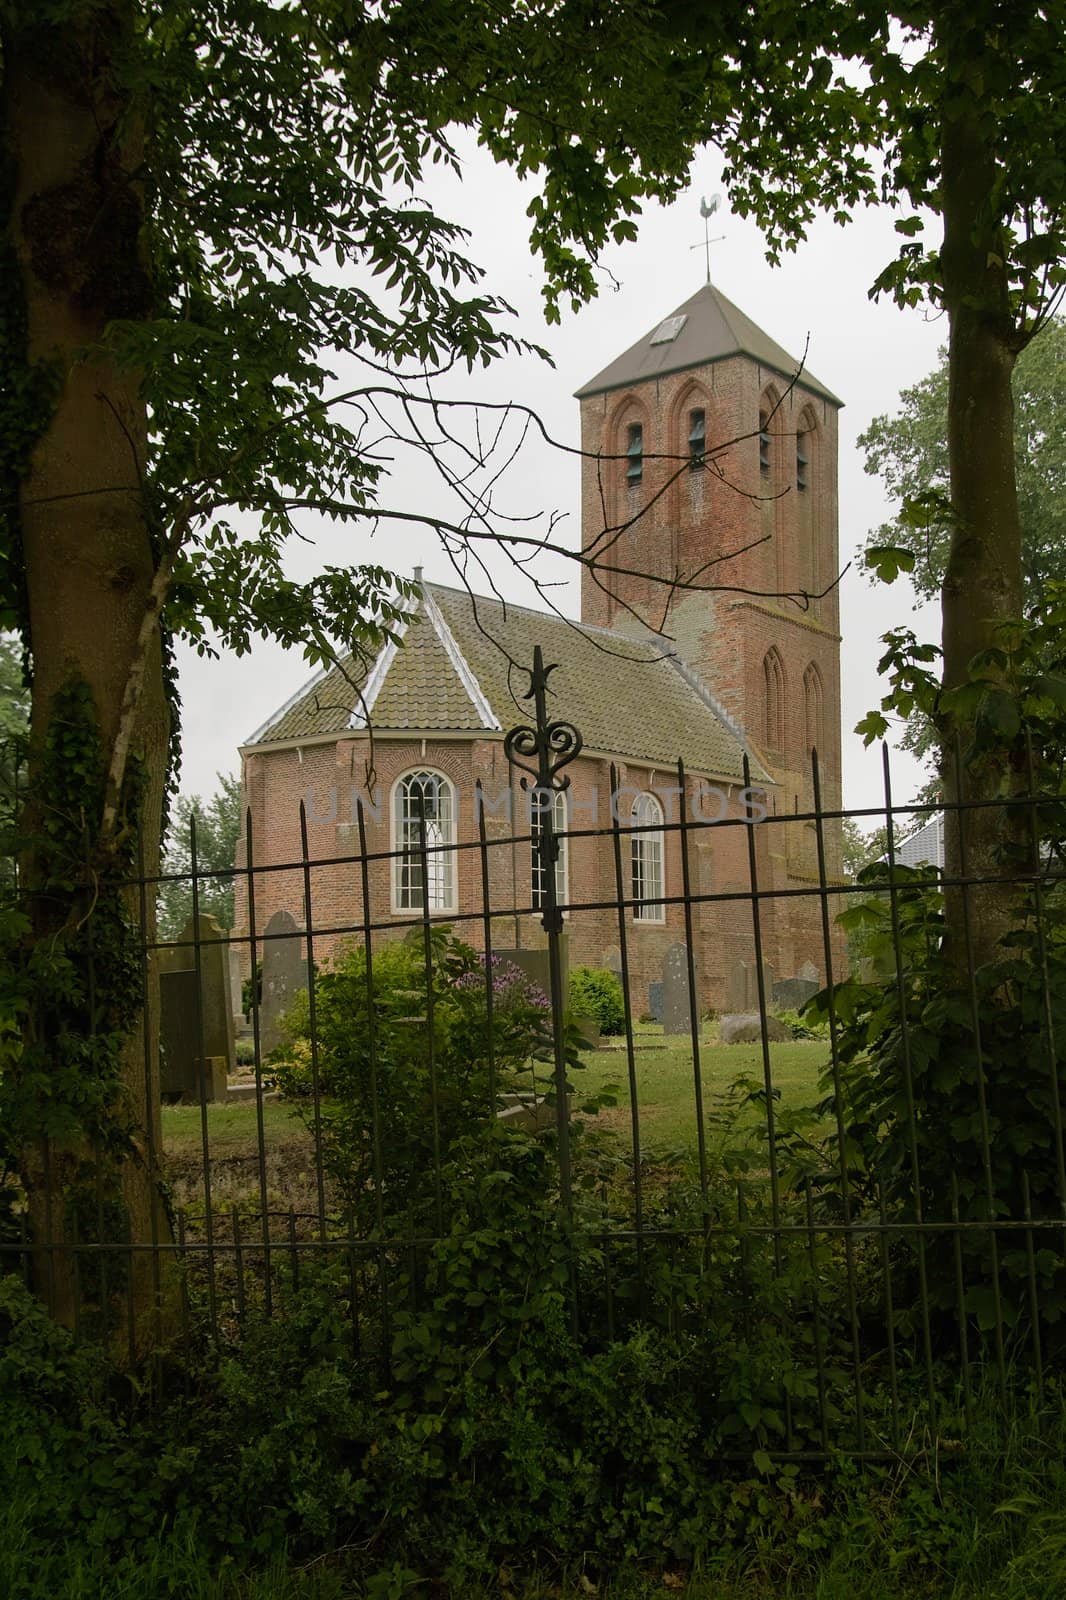 An old medieval church in the village of Westerland, seen through the trees that surround the graveyard around the church